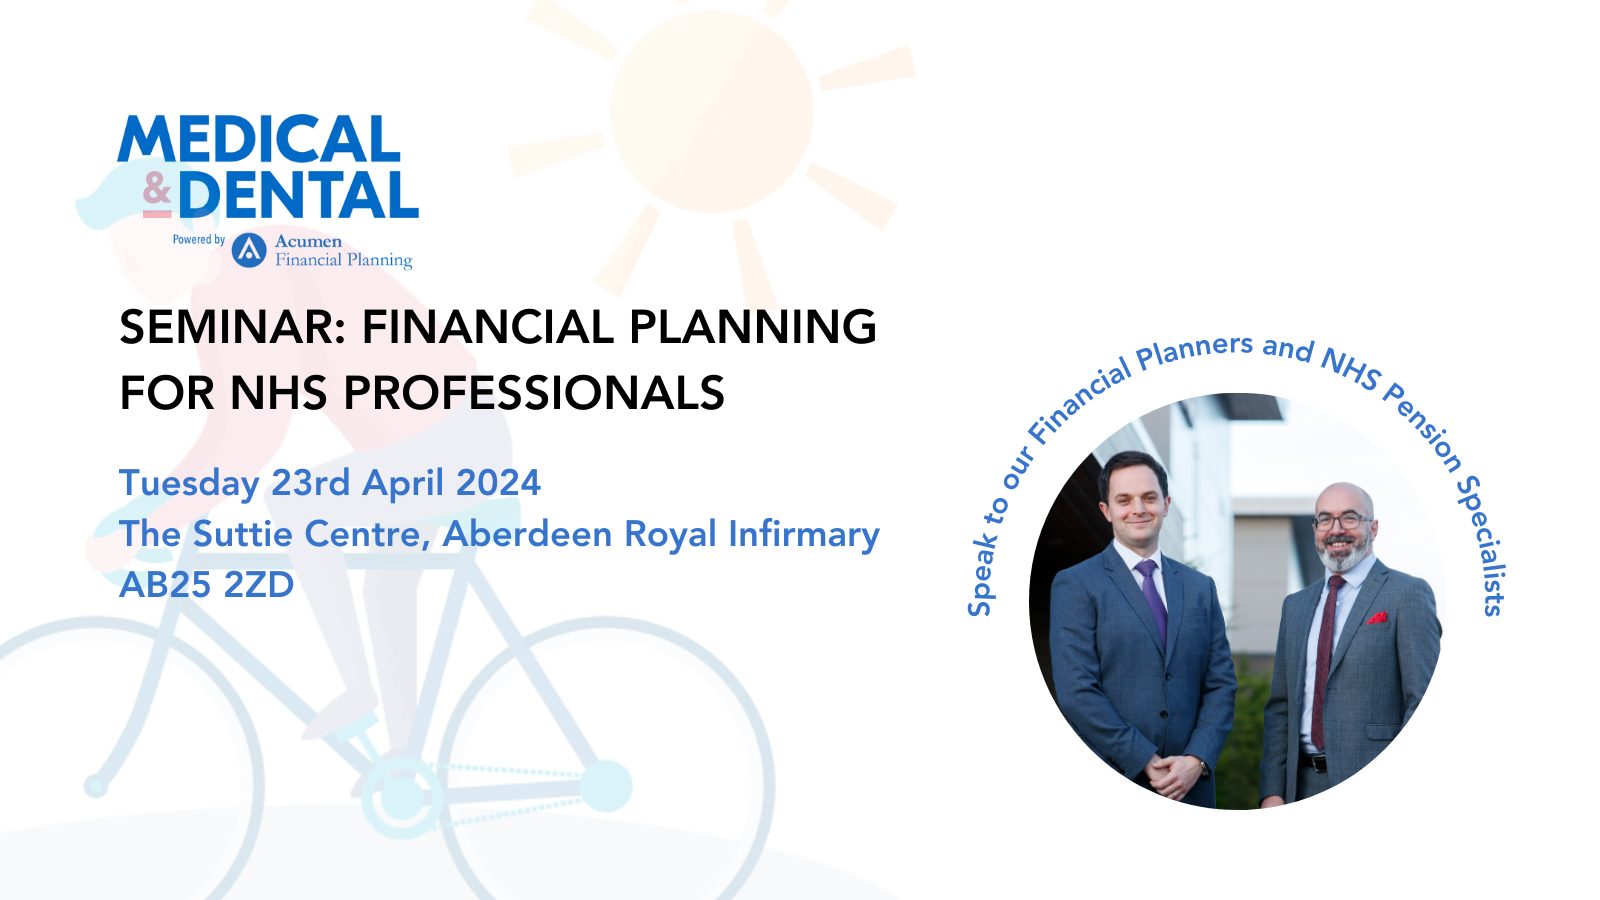 Financial Planning for NHS Professionals Seminar